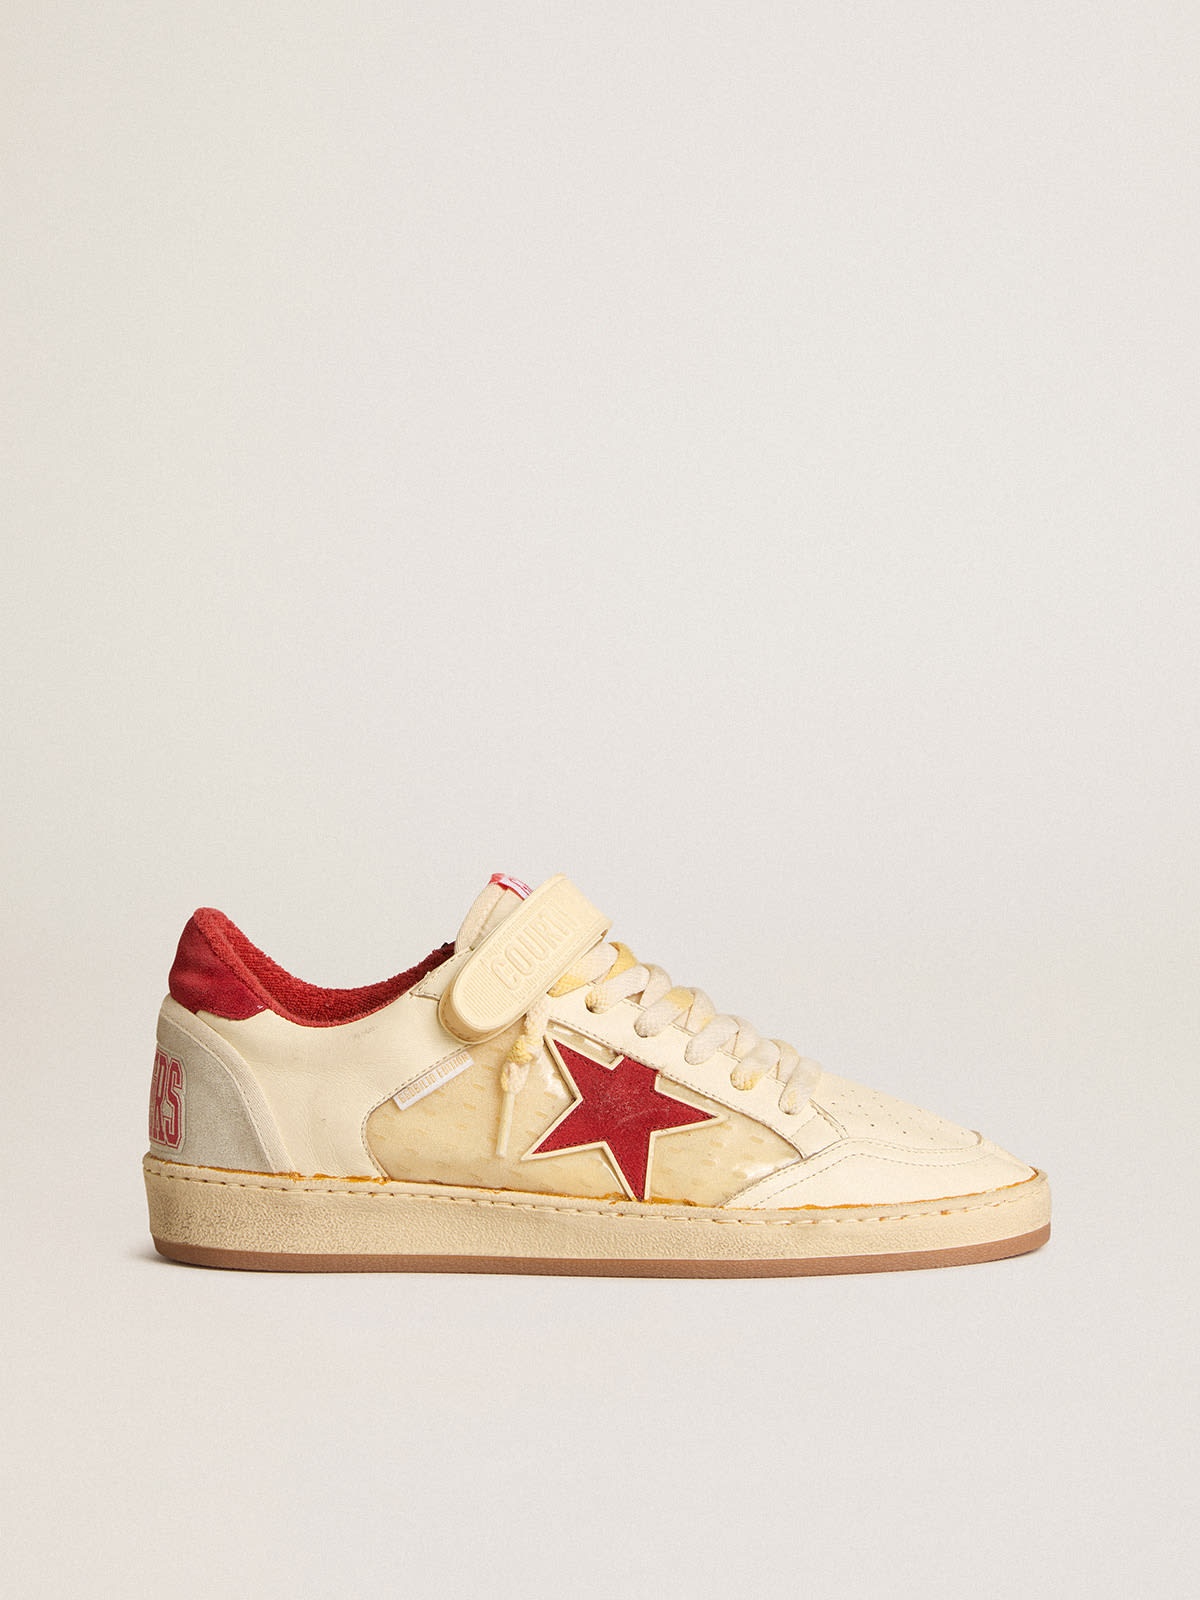 Men’s Ball Star LAB in nappa and PVC with red suede star and heel tab - 1